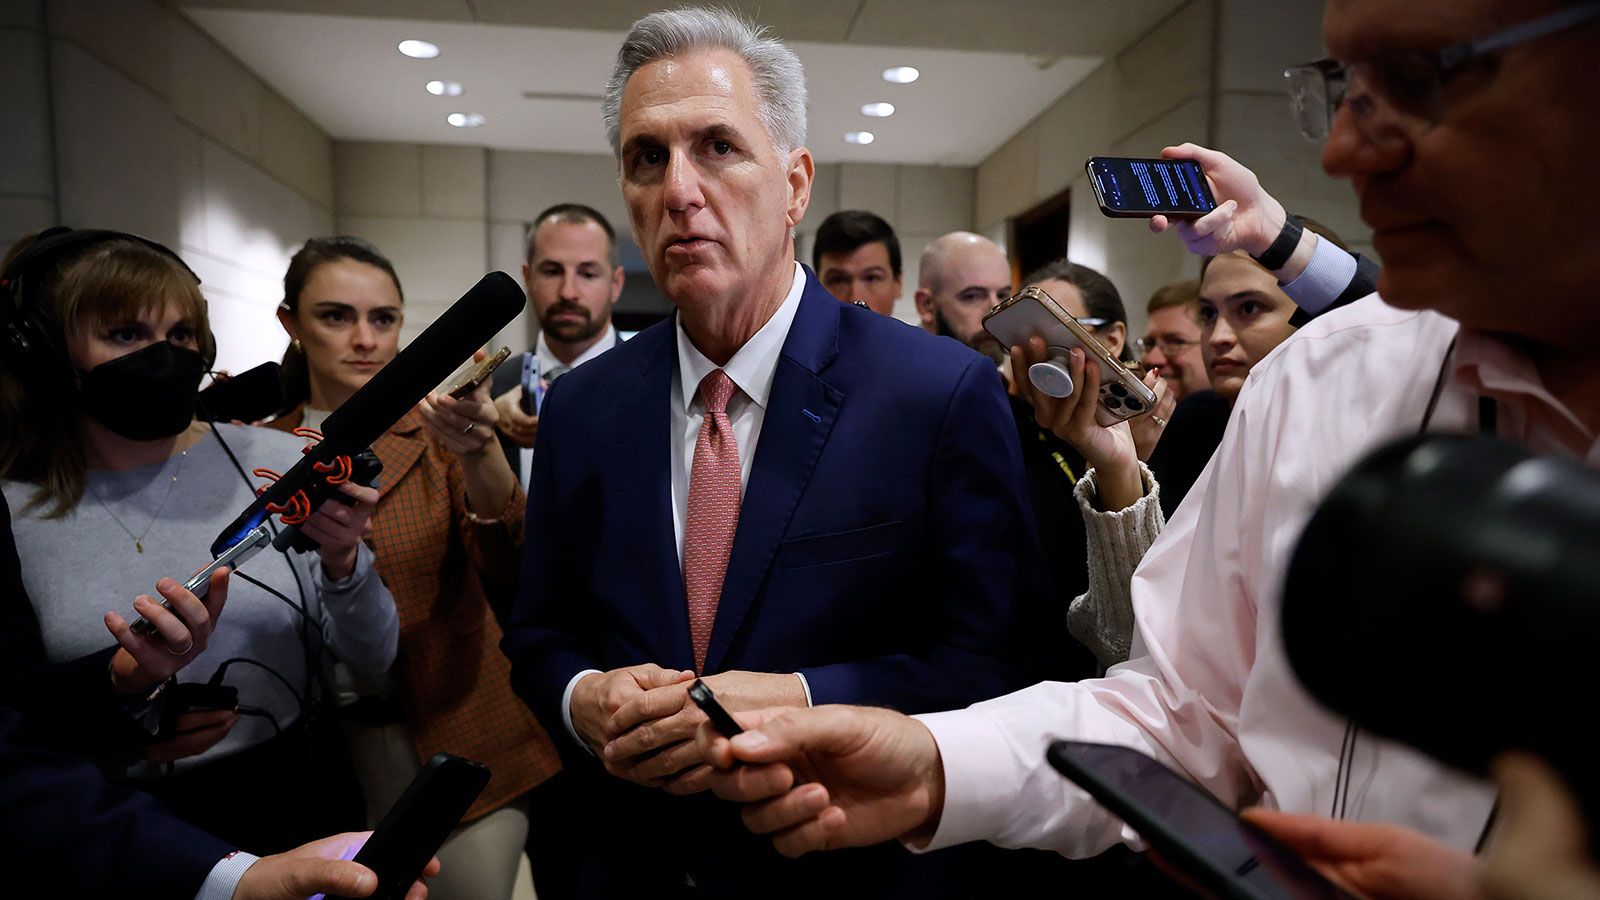 McCarthy wins GOP nomination for speaker, with 31 Republicans voting against him